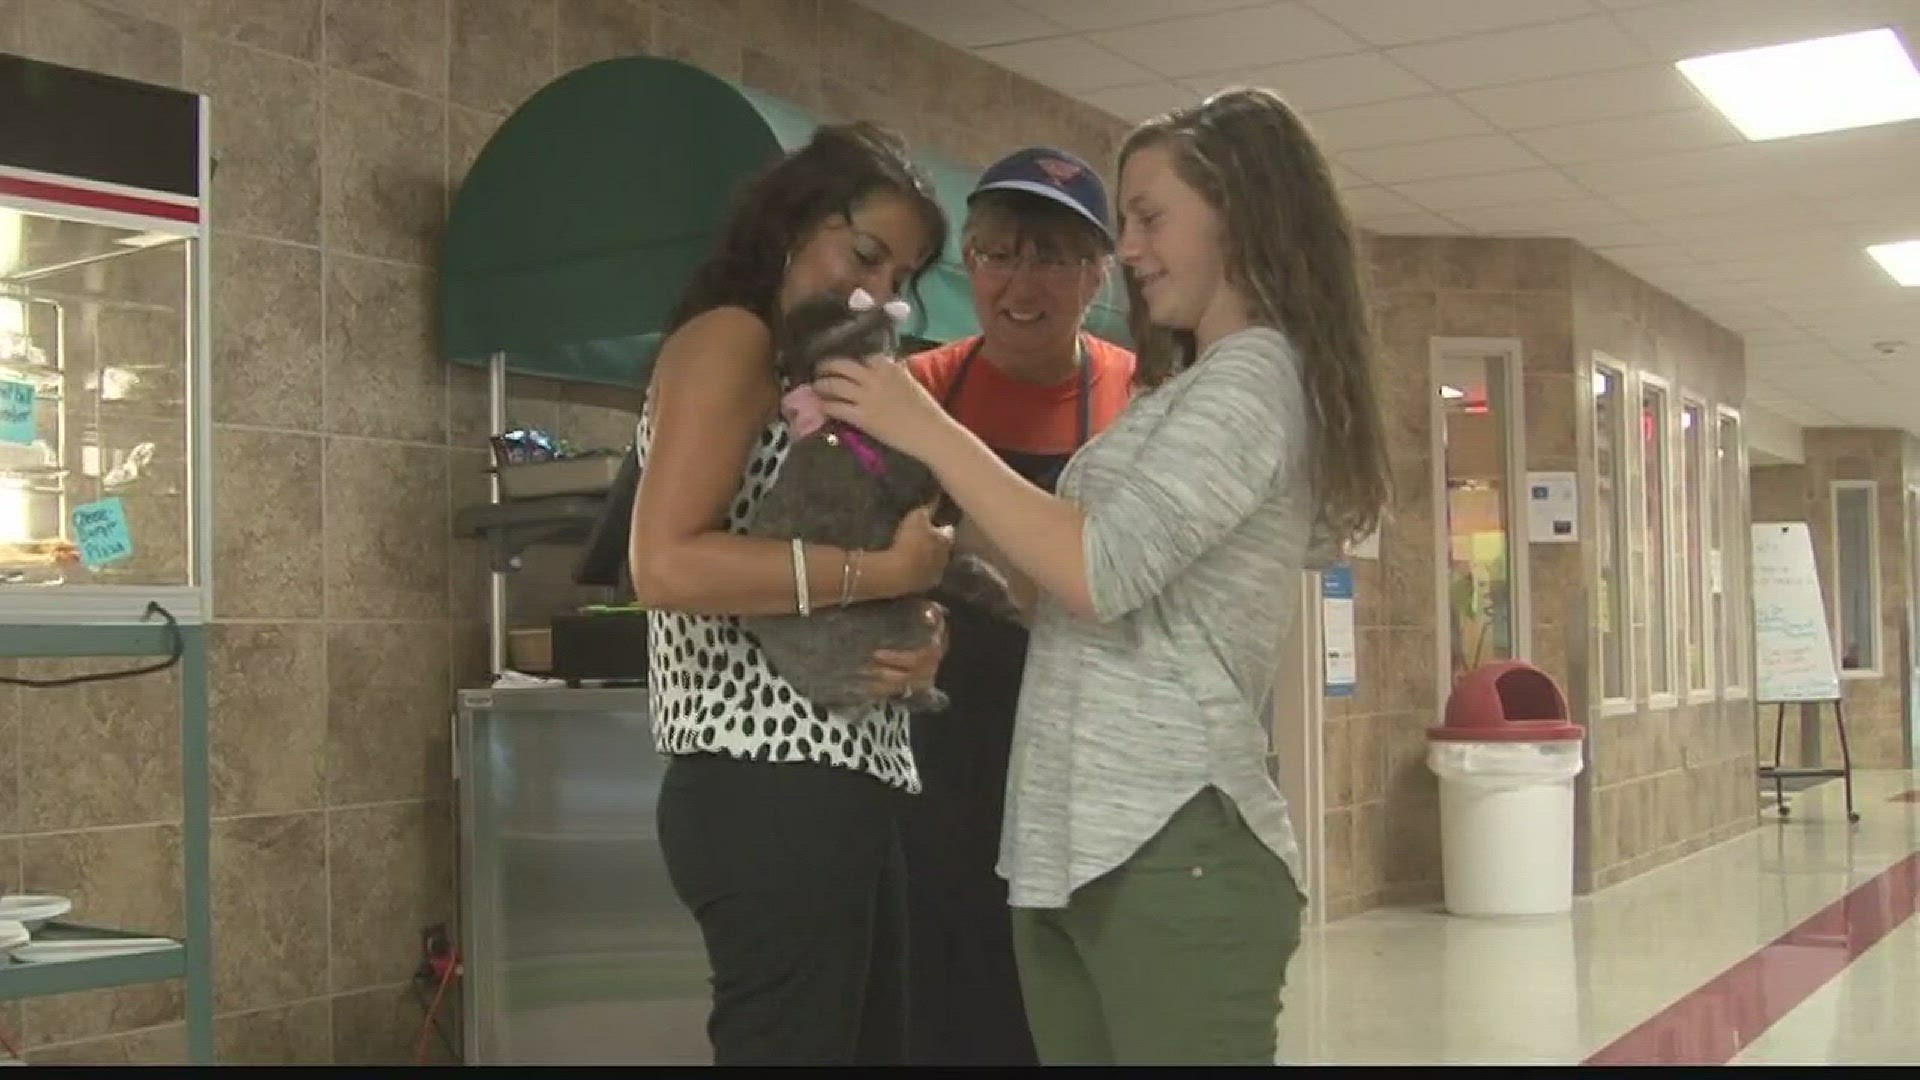 Dogs help comfort student and staff at Iroquois schools